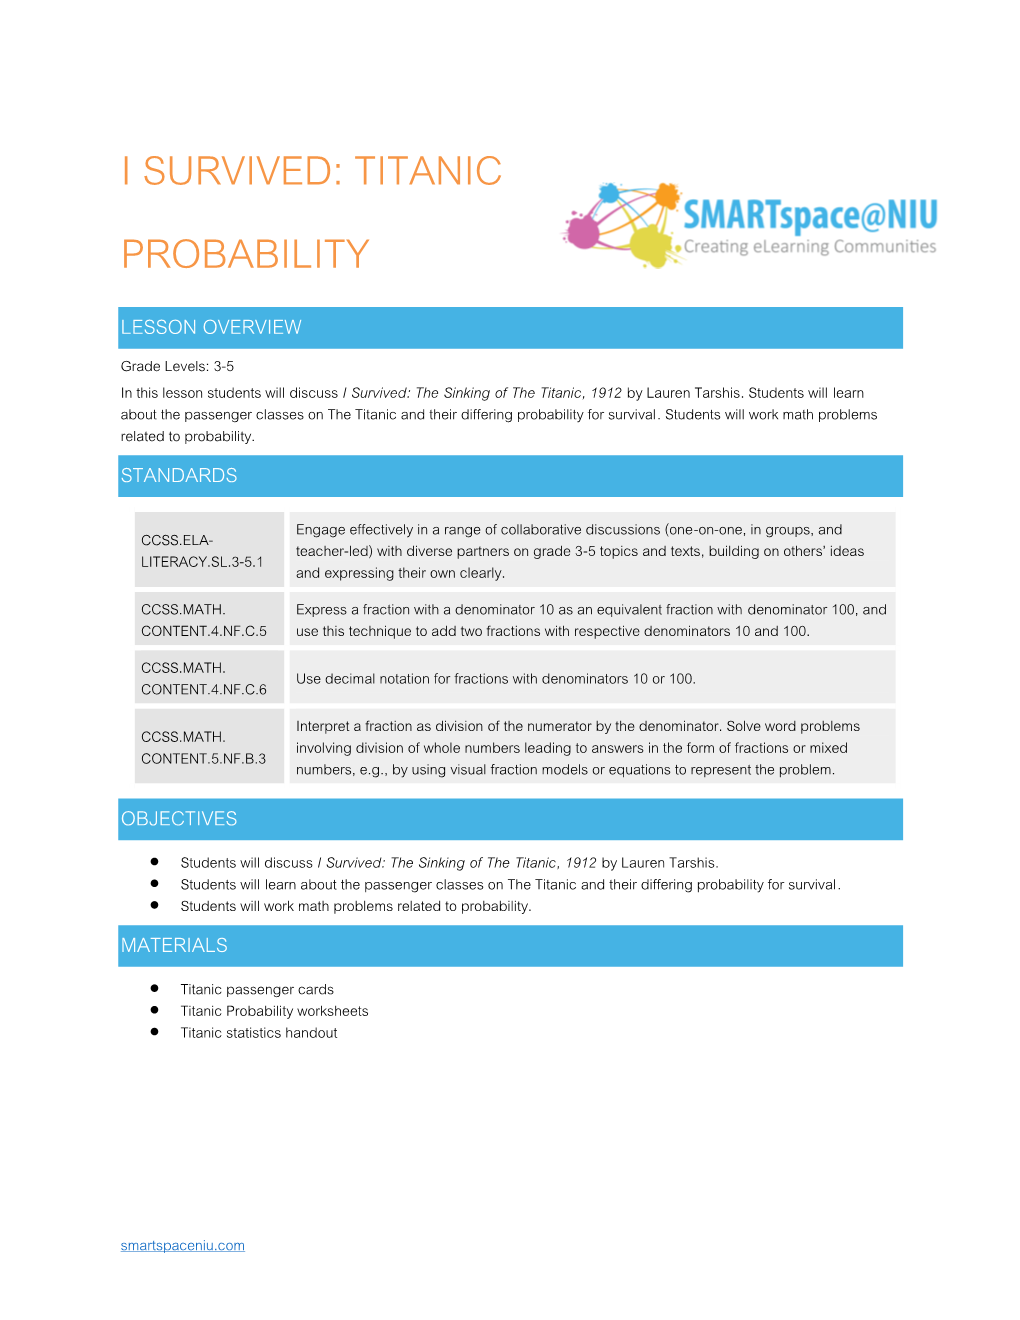 I SURVIVED: TITANIC PROBABILITY LESSON OVERVIEW Grade Levels: 3-5 in This Lesson Students Will Discuss I Survived: the Sinking of the Titanic, 1912 by Lauren Tarshis